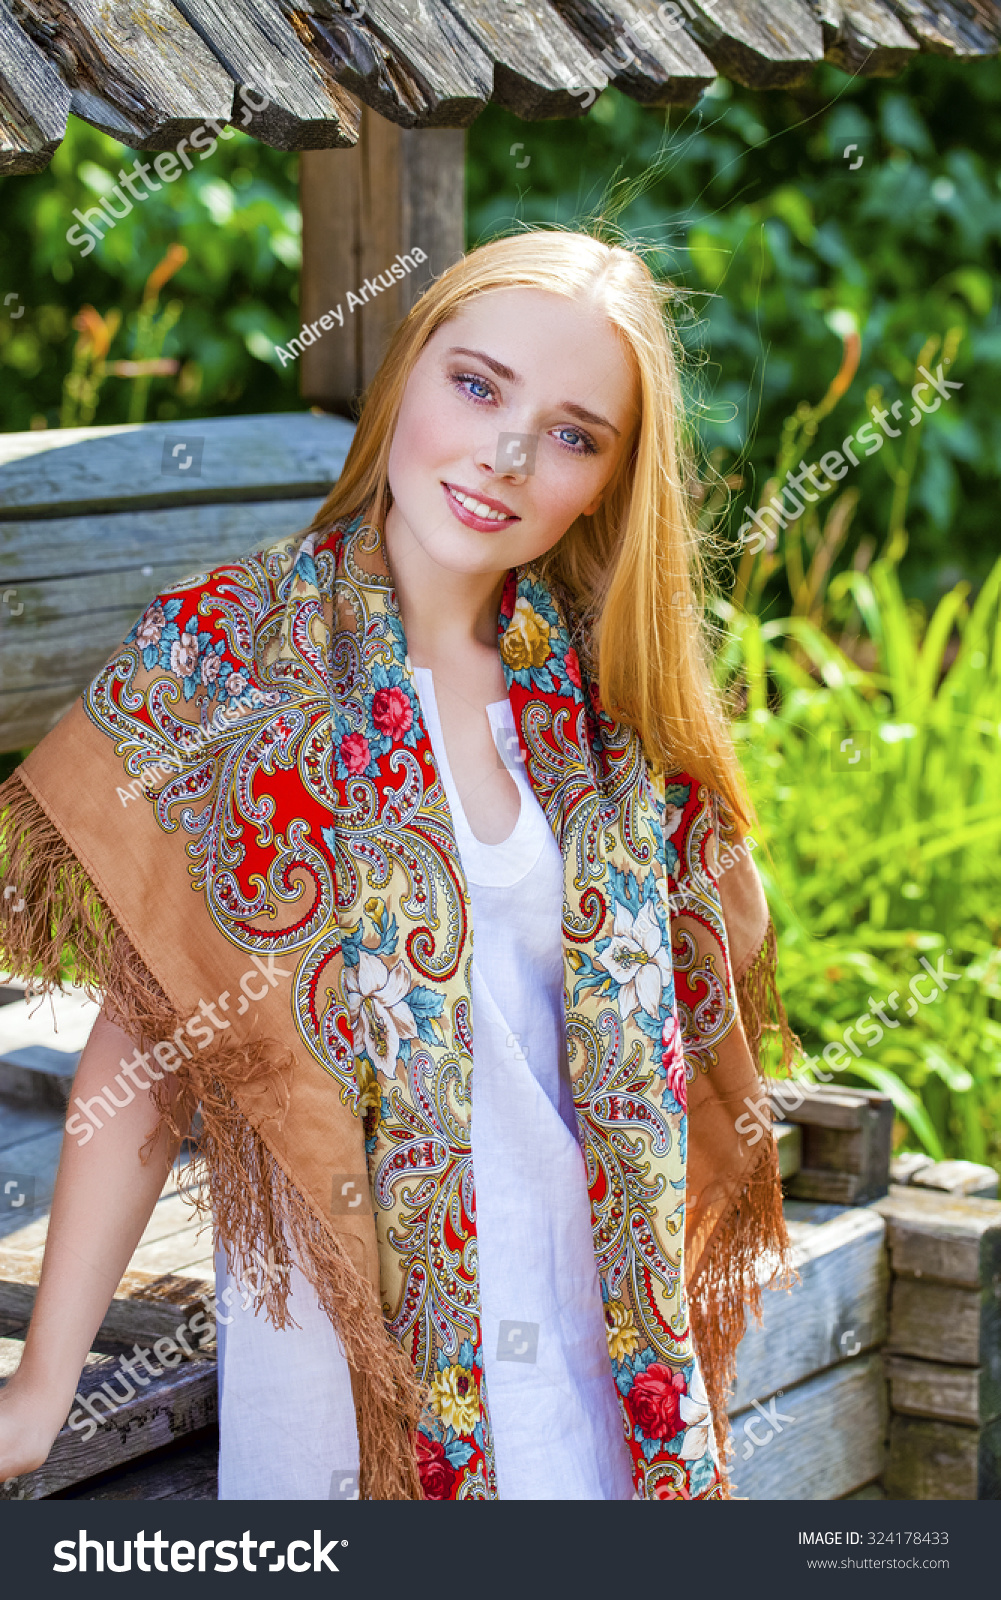 https://image.shutterstock.com/z/stock-photo-russian-beauty-woman-in-the-national-patterned-scarf-324178433.jpg